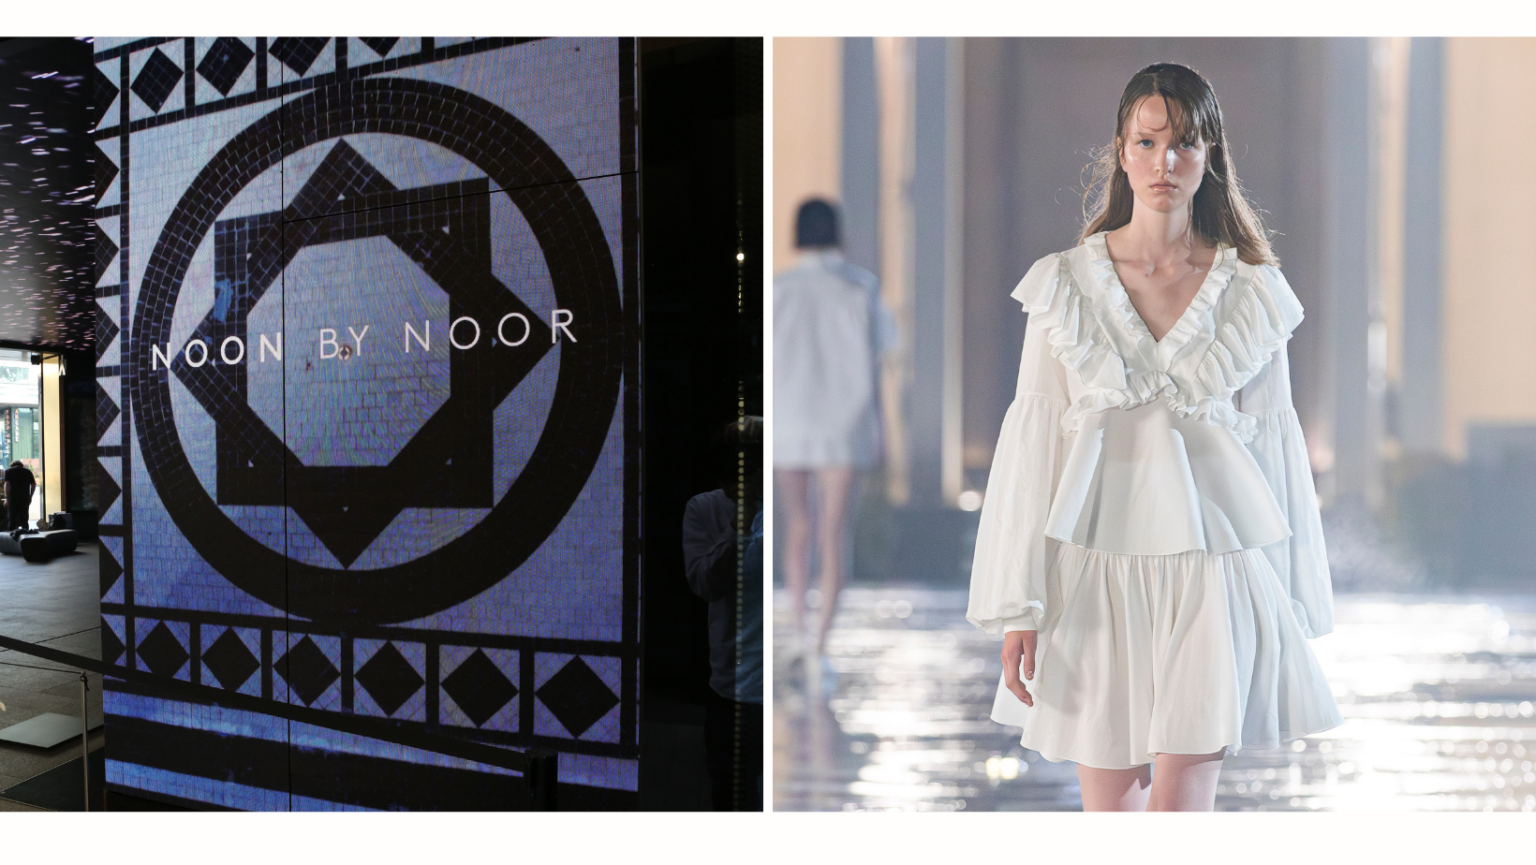 Bahraini Brand Noon by Noor Showcased Their Collection ‘Moonlit’ at ...